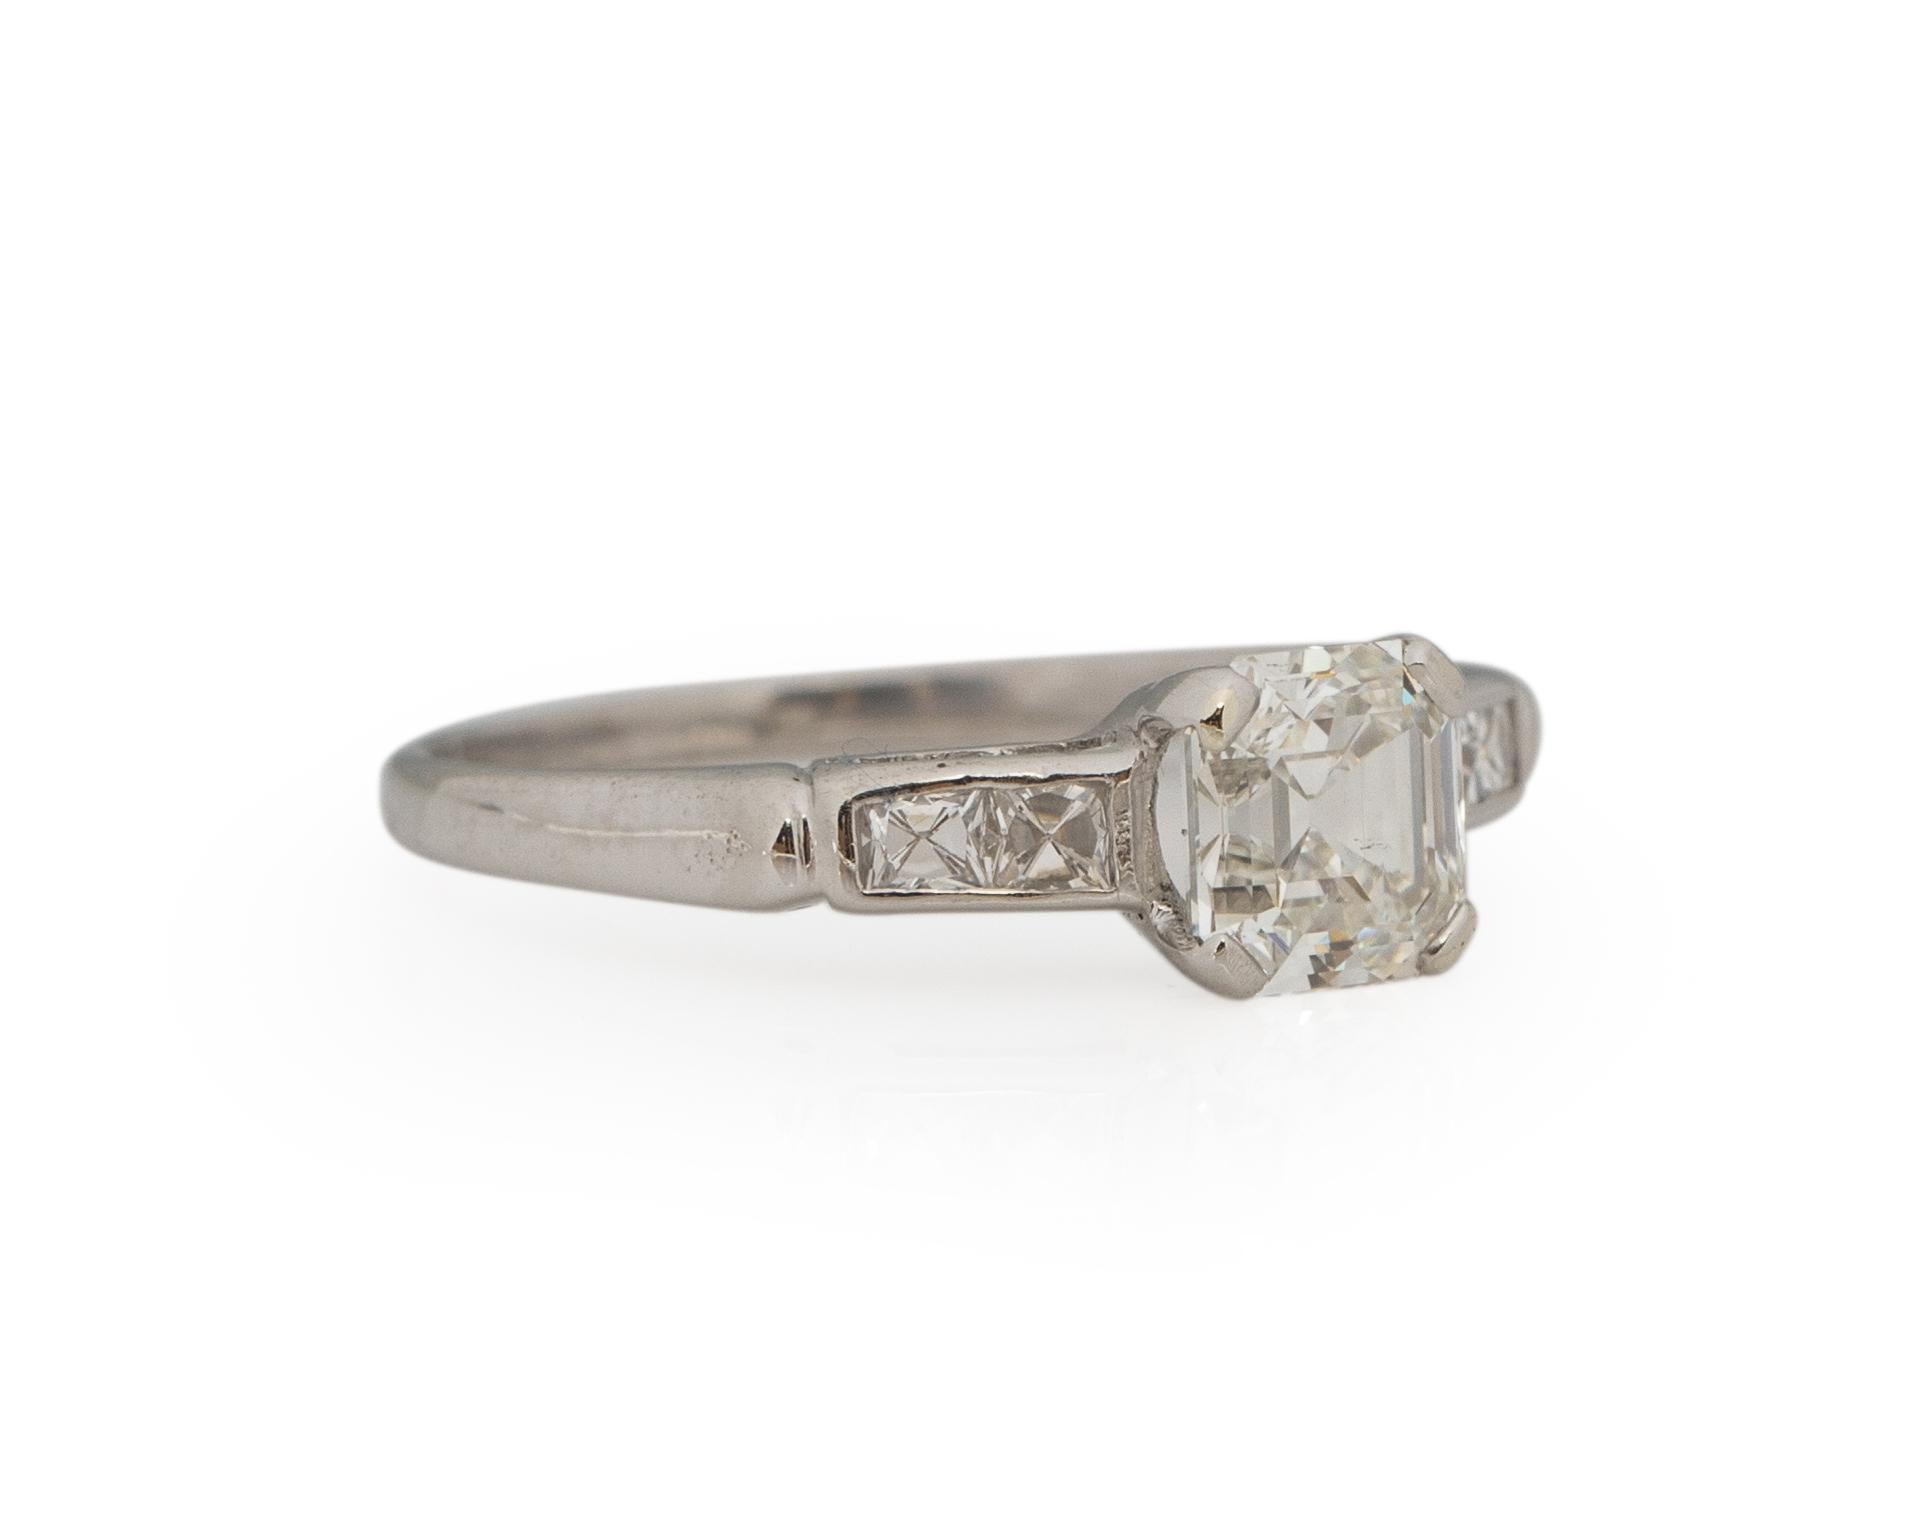 Ring Size: 6.5
Metal Type: Platinum [Hallmarked, and Tested]
Weight: 2.9 grams

Center Diamond Details:
GIA REPORT #:
Weight: 1.02ct
Cut: Vintage Asscher Cut
Color: I
Clarity: VS2
Measurements: 5.86mm x 5.50mm x 3.80mm

Side Stone Details:
Weight: